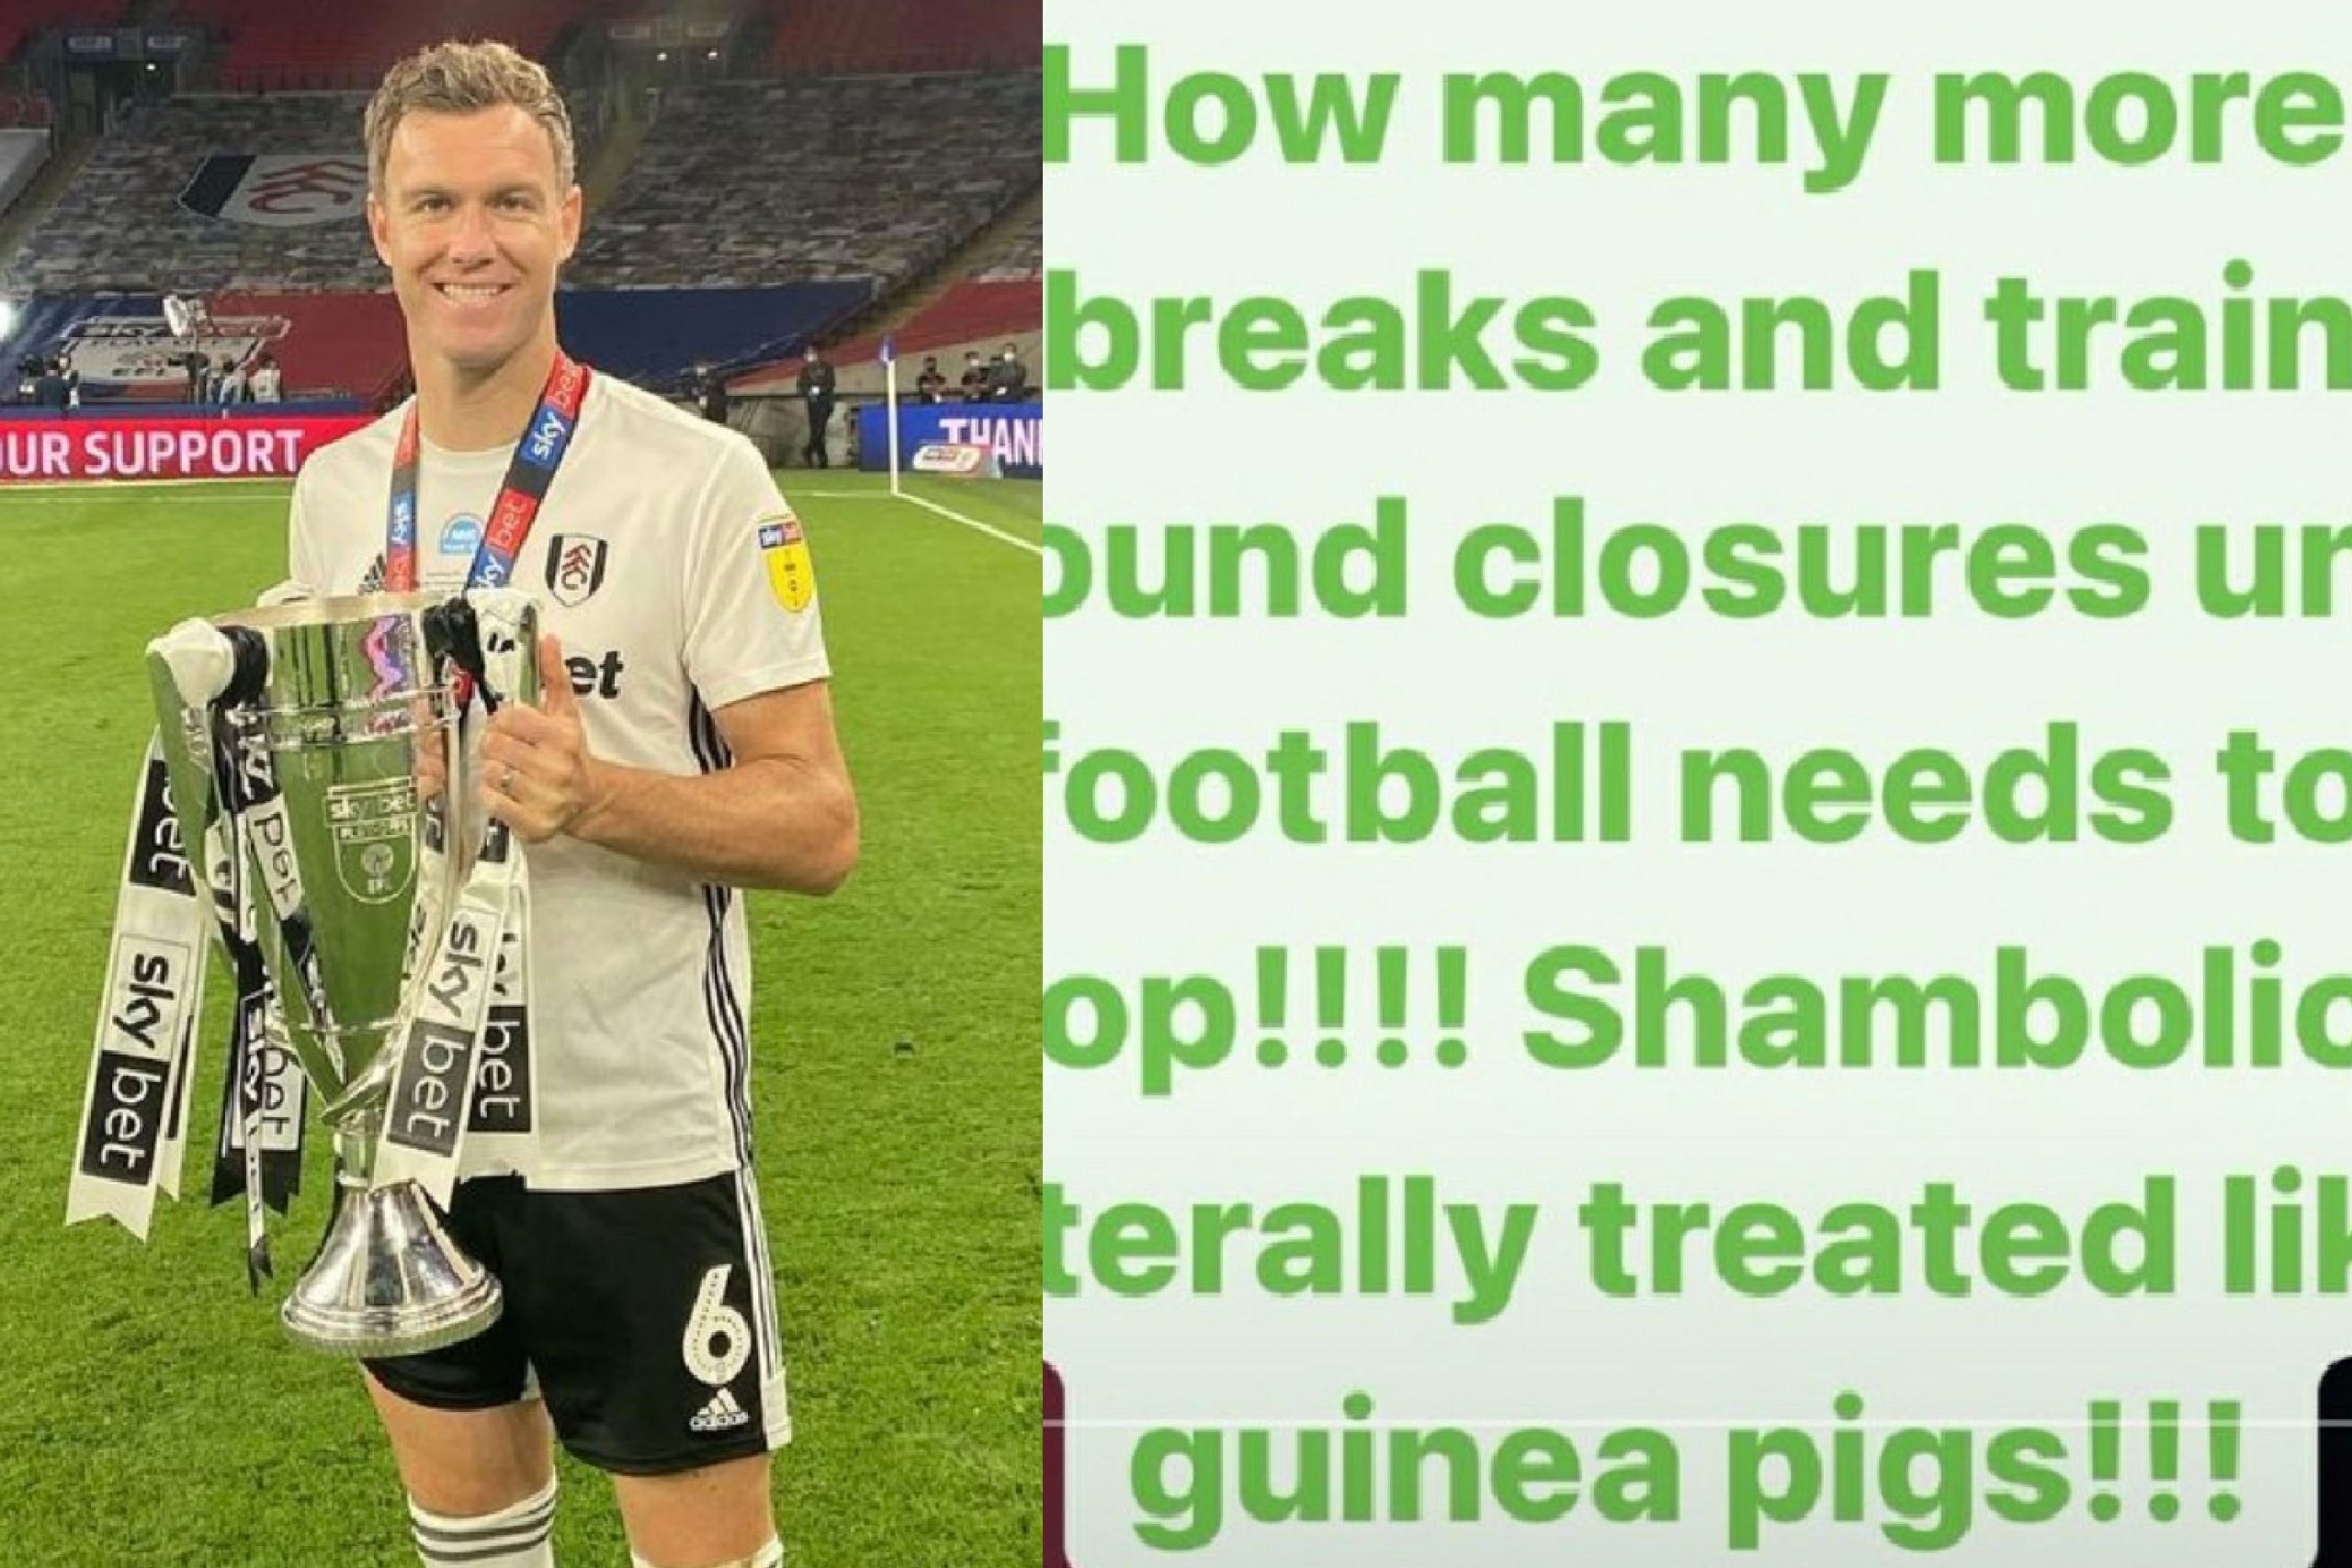 Fulham star slams the govt. for treating footballers like ‘guinea pigs’ amid Covid surge